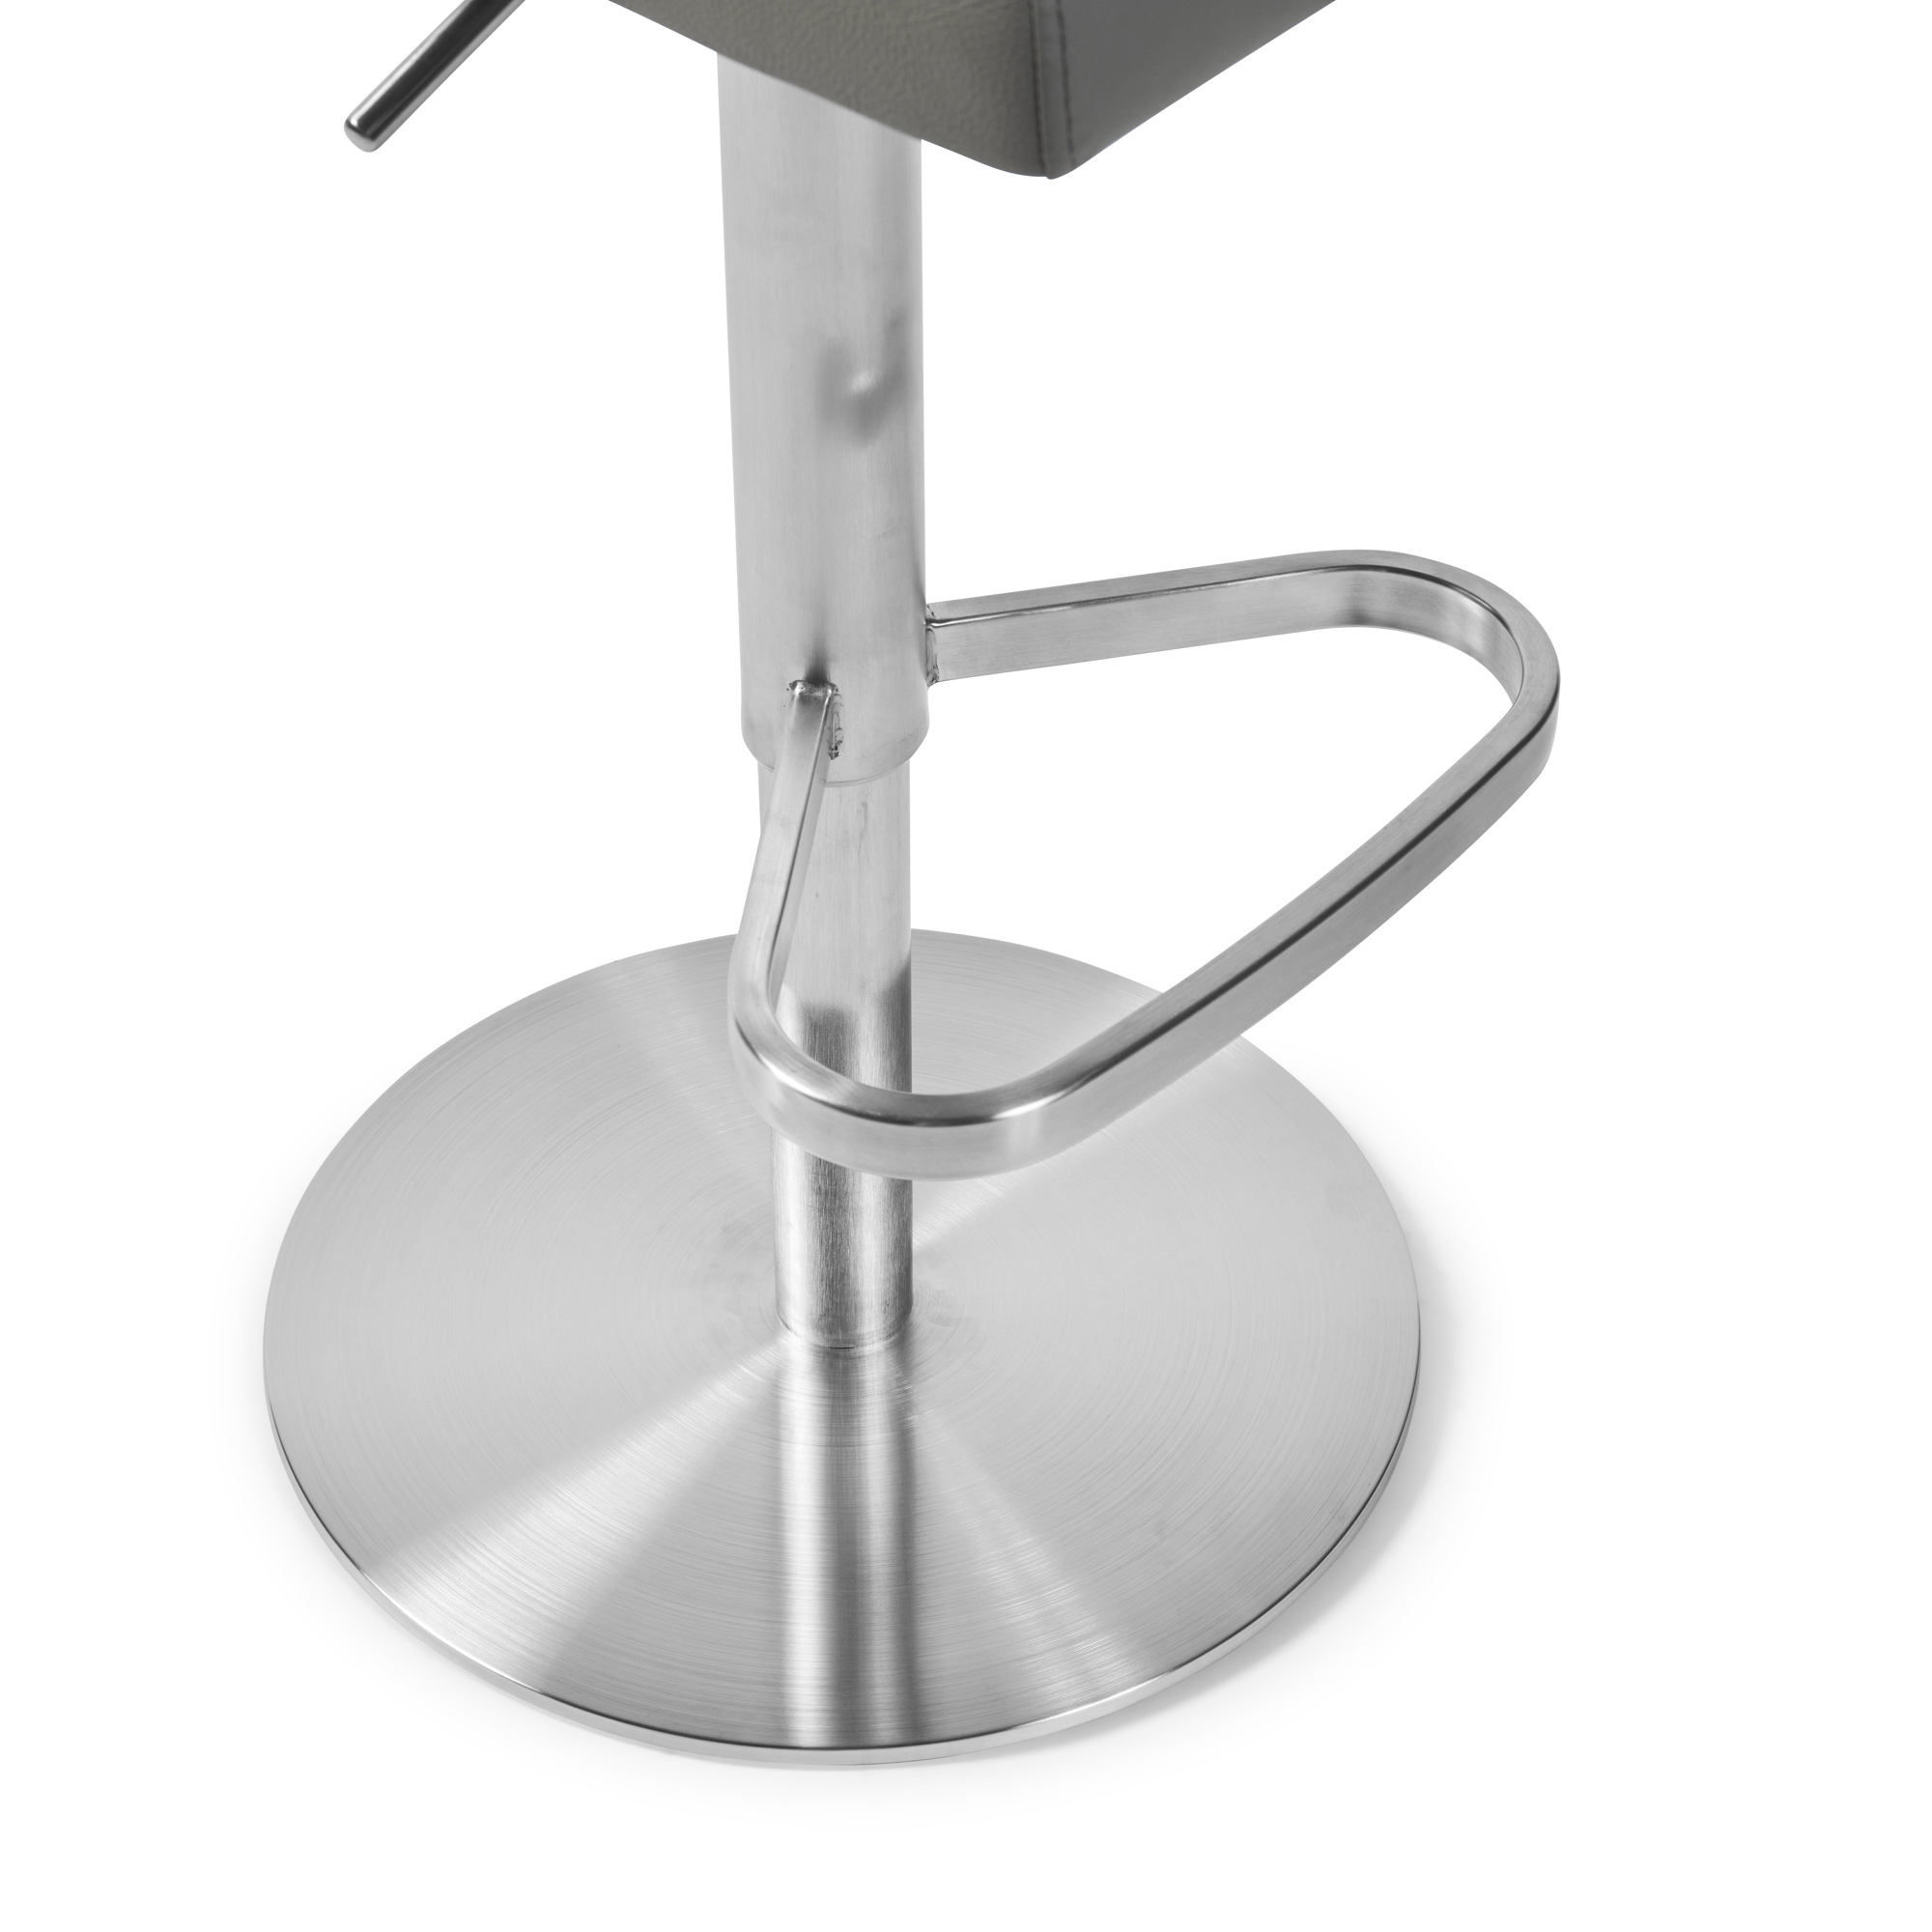 Portland Brushed Steel Gas Lift Bar Stool in Grey Faux Leather